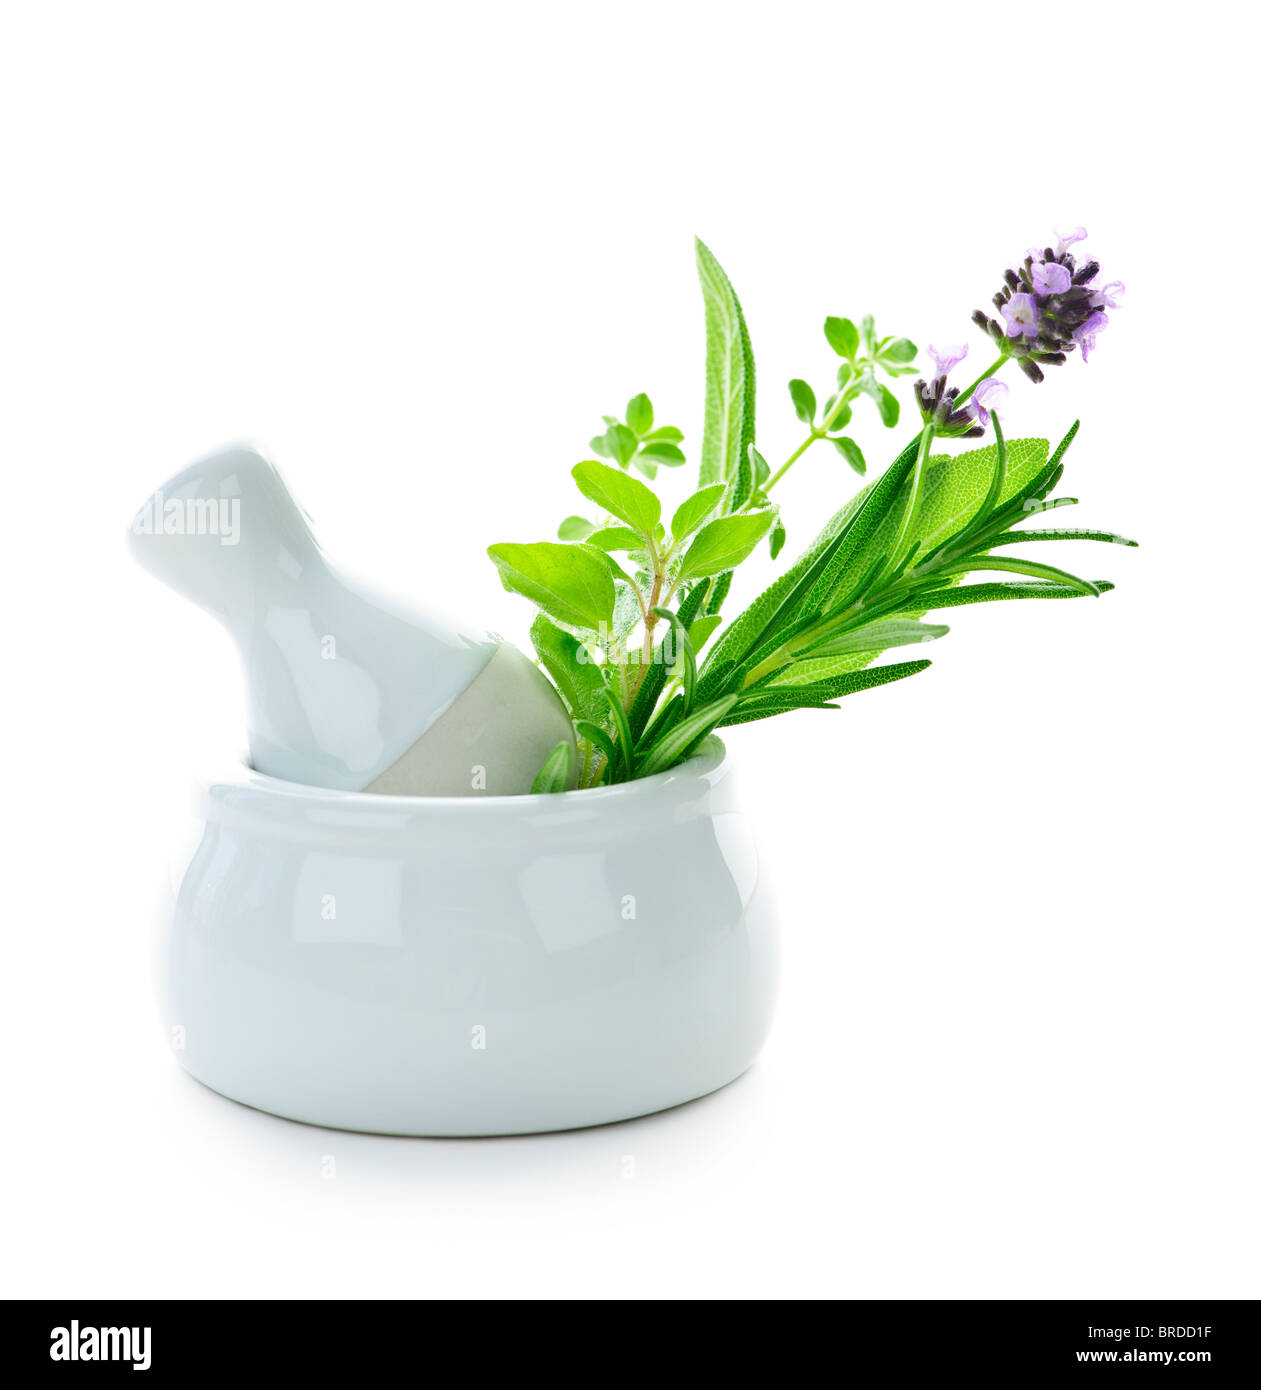 Healing herbs in white ceramic mortar and pestle isolated on white background Stock Photo